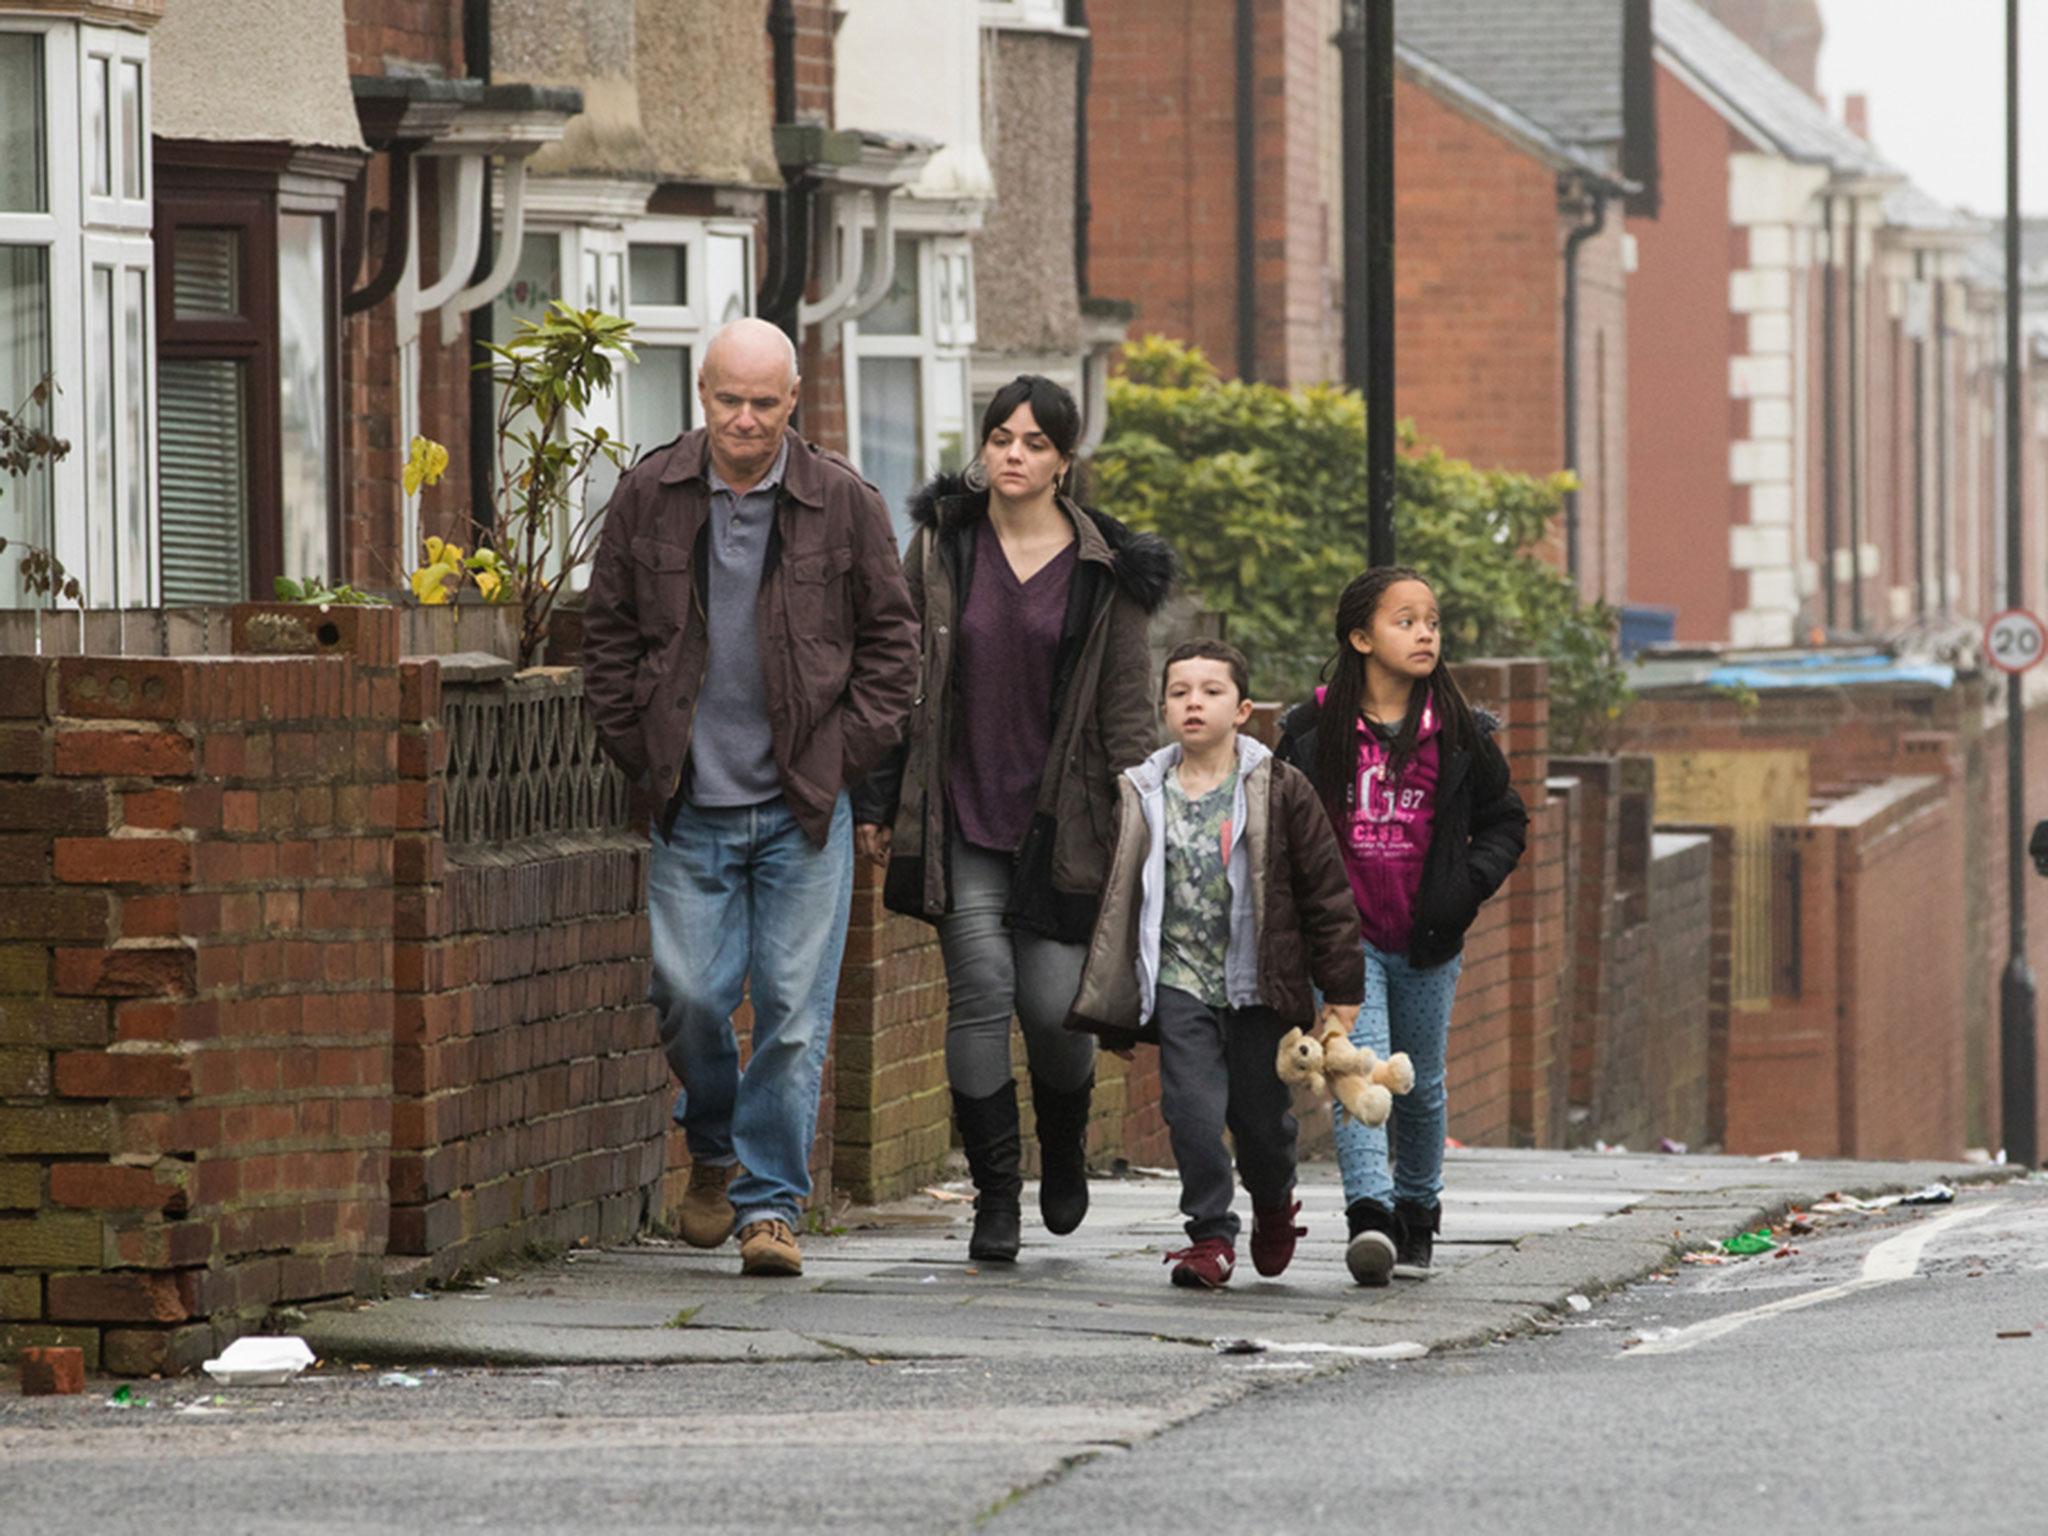 Ken Loach's 'I, Daniel Blake' tells the story of a joiner who seeks State financial help following an illness